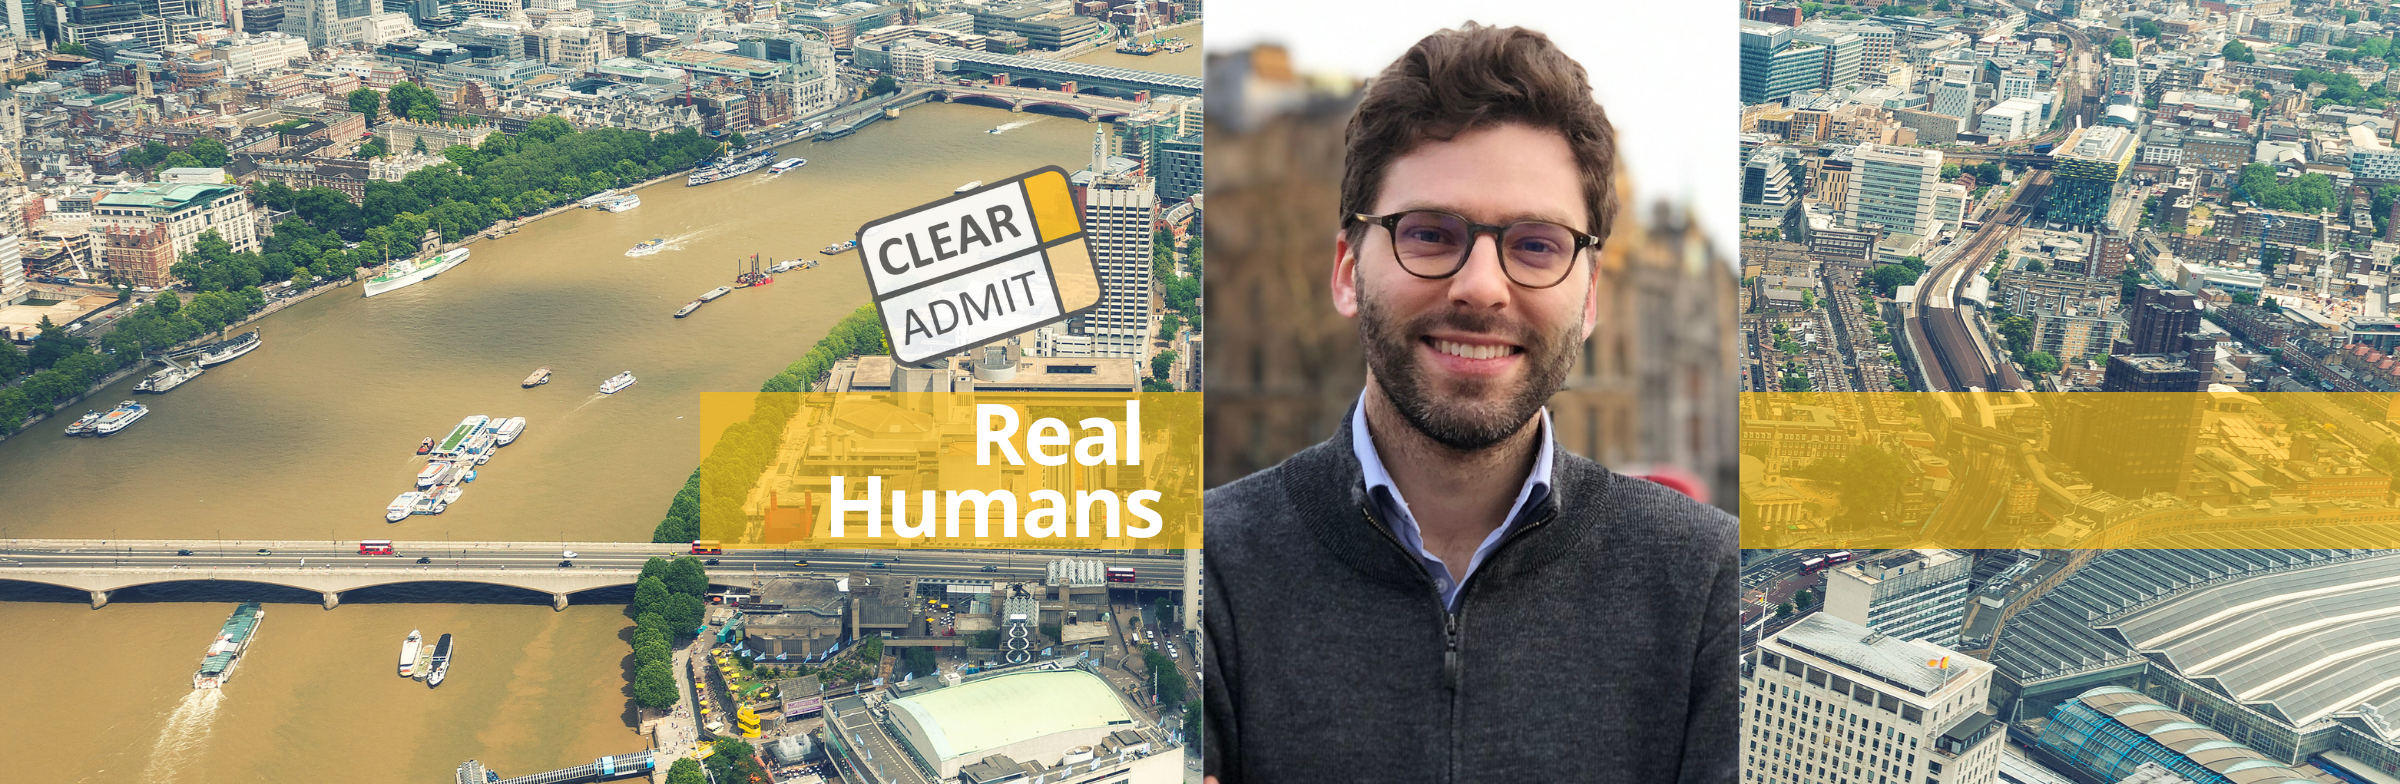 Image for Real Humans of Amazon: Stéphane Vukovic, HBS ’21, Country Lead at Amazon Prime Video